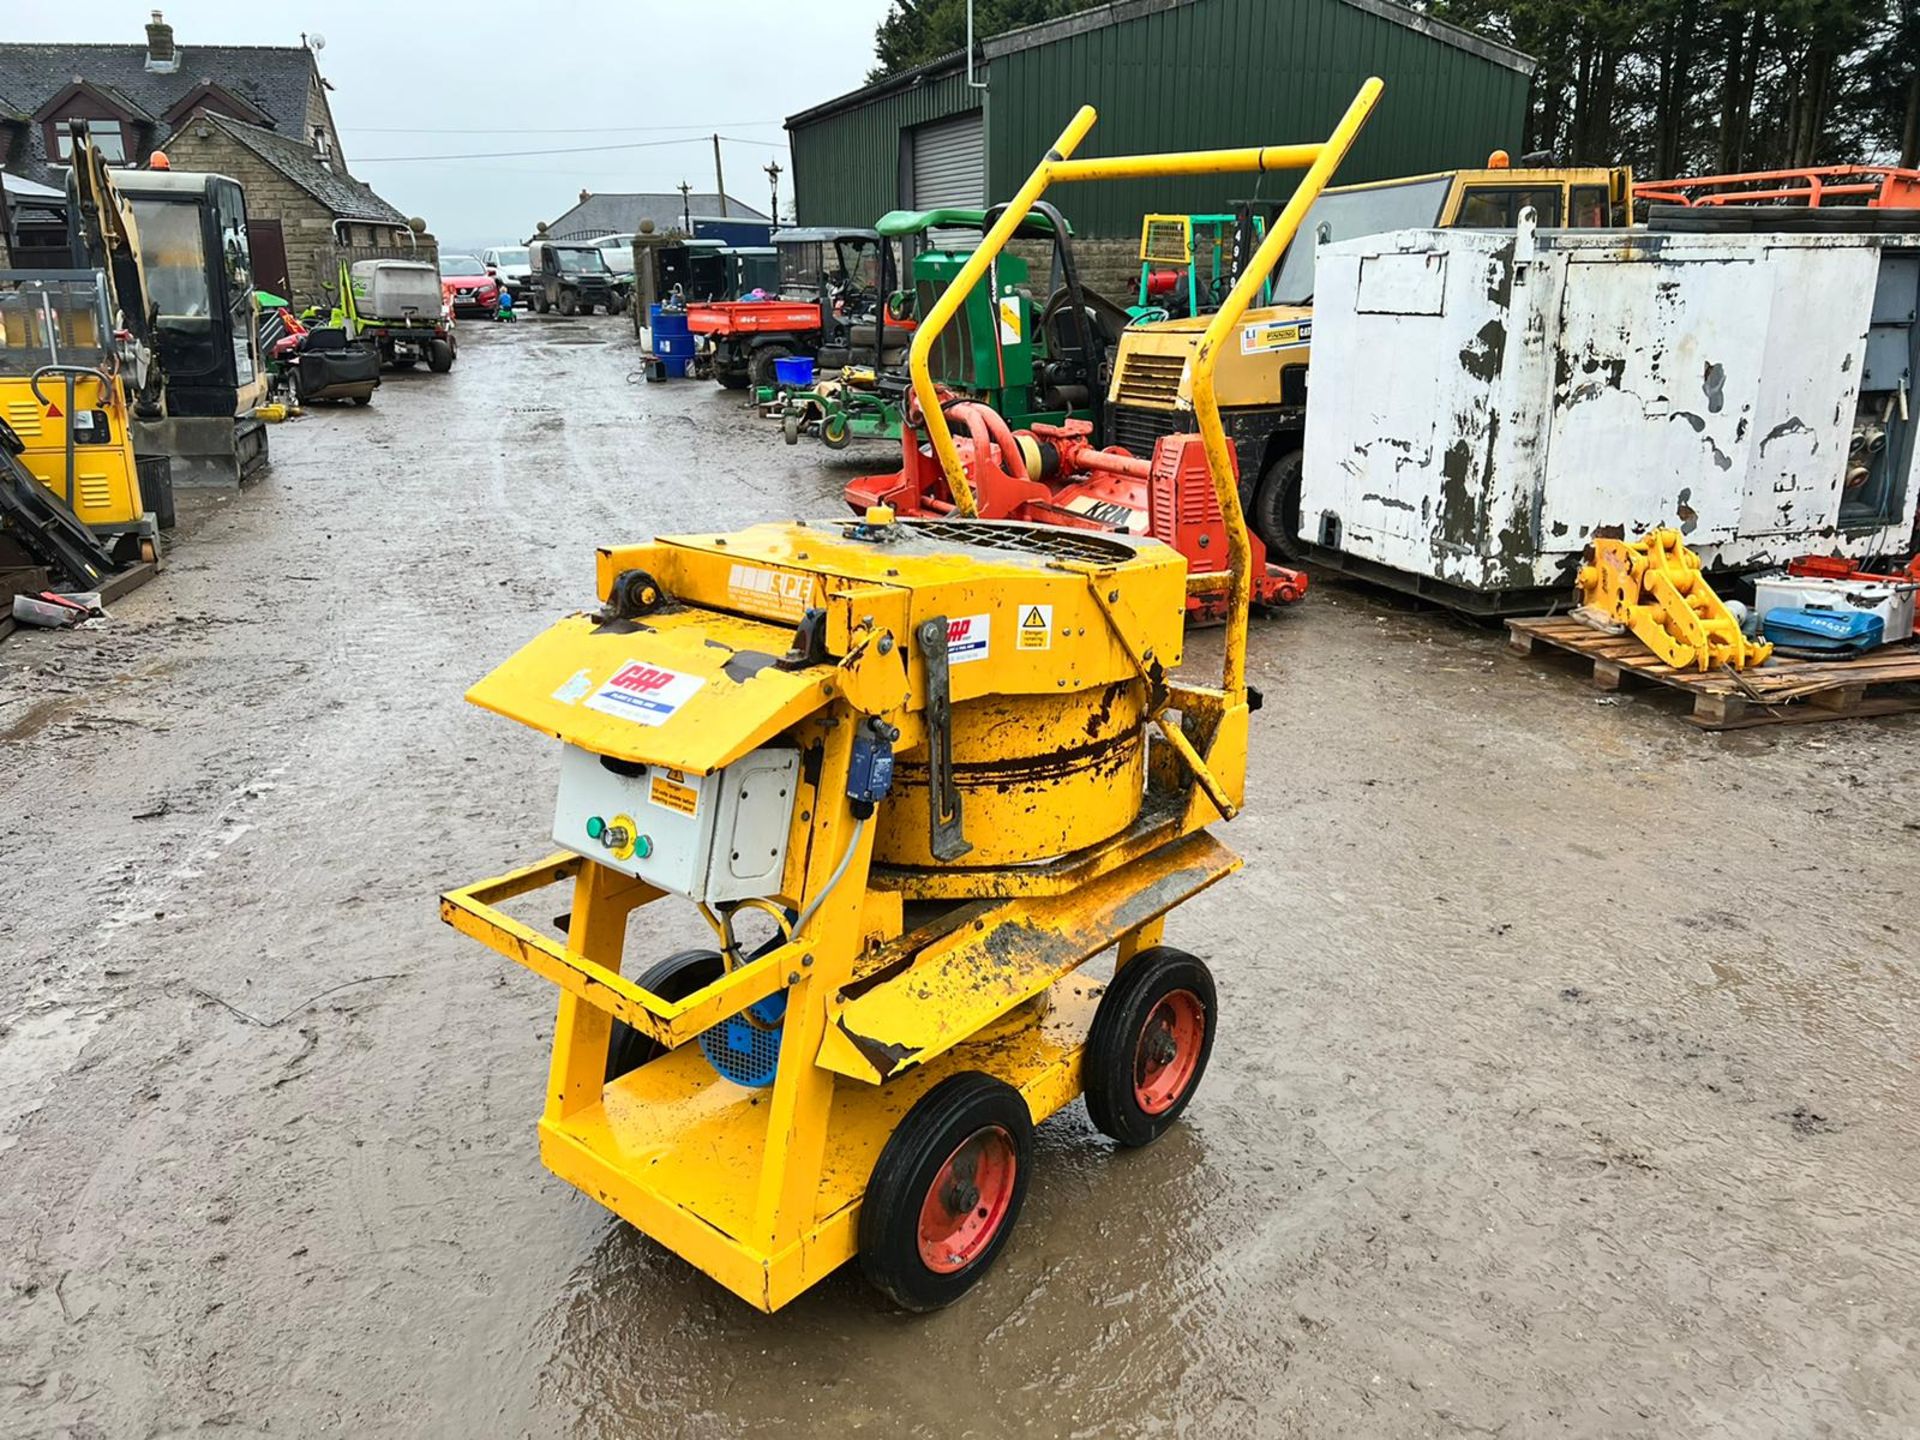 SPE MIXIT 60-1 110v TUB MIXER, 110 VOLT REQUIRED TO POWER, ON WHEELS EASY TO MOVE AROUND *PLUS VAT - Image 2 of 16